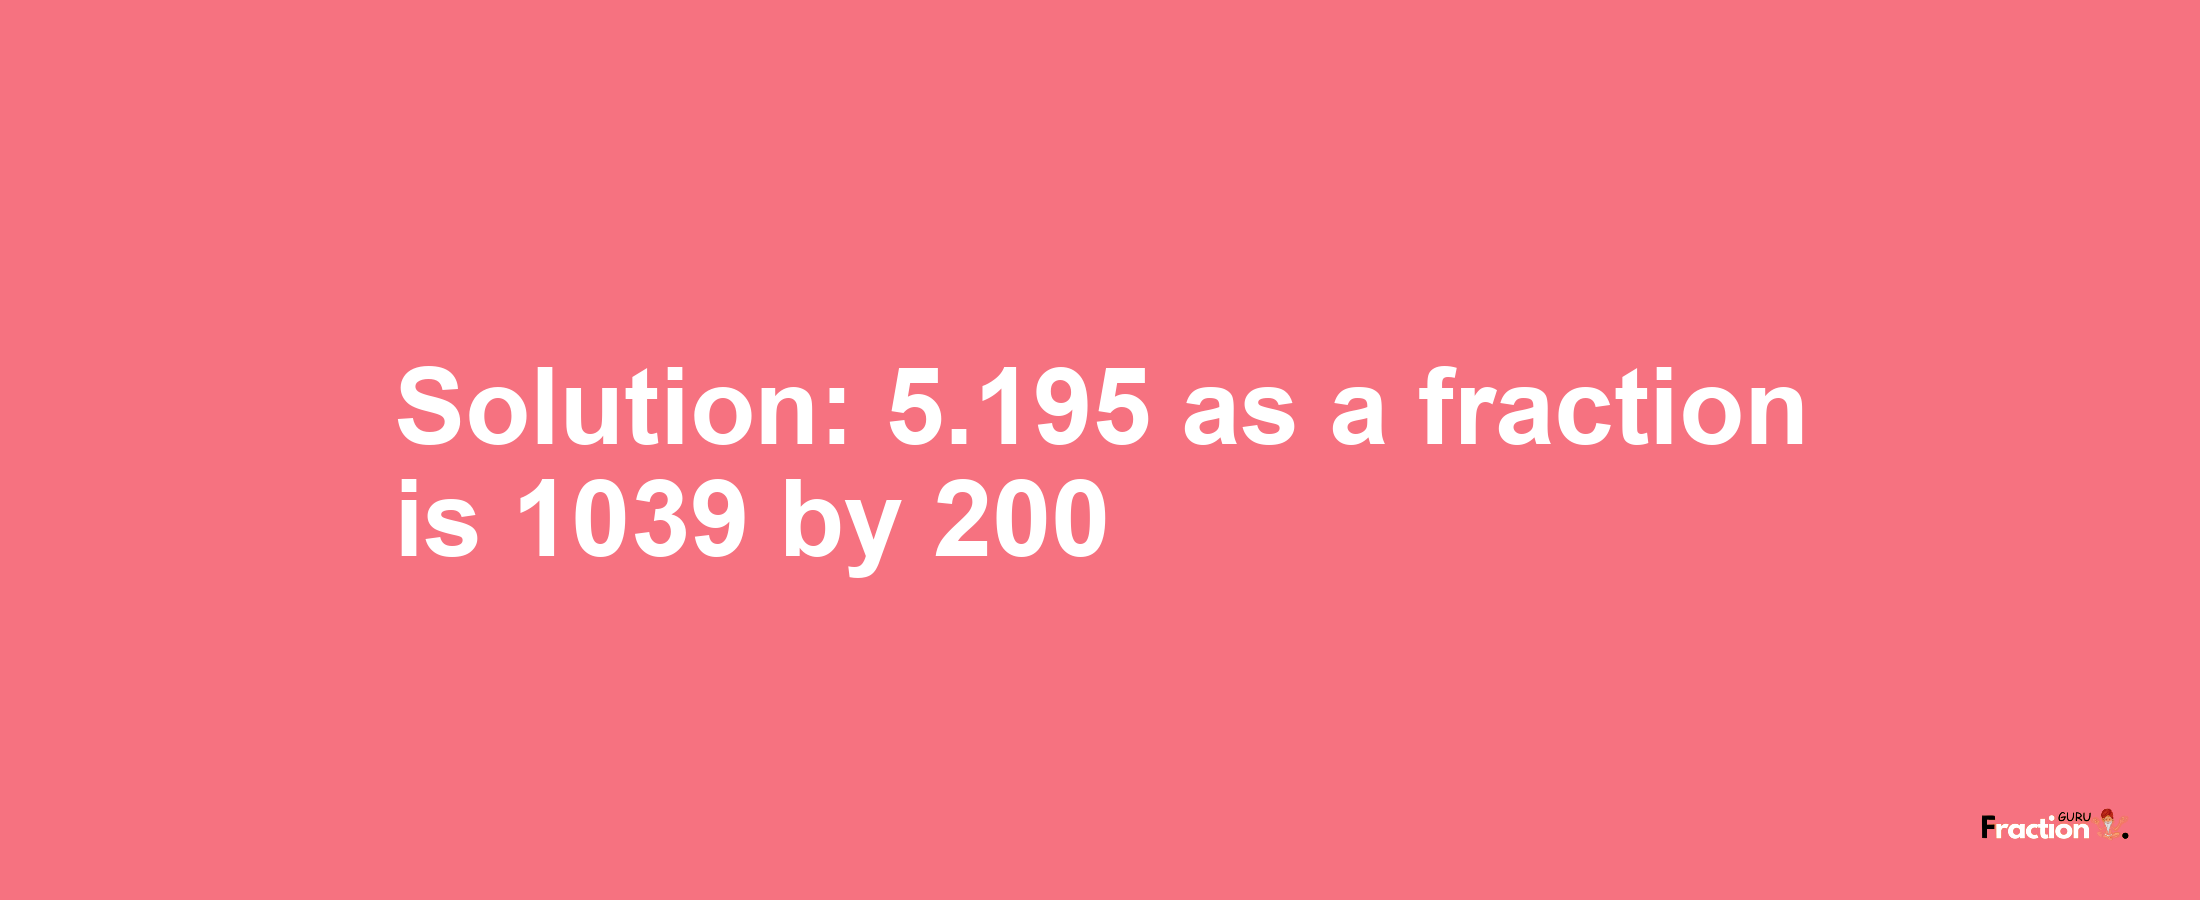 Solution:5.195 as a fraction is 1039/200